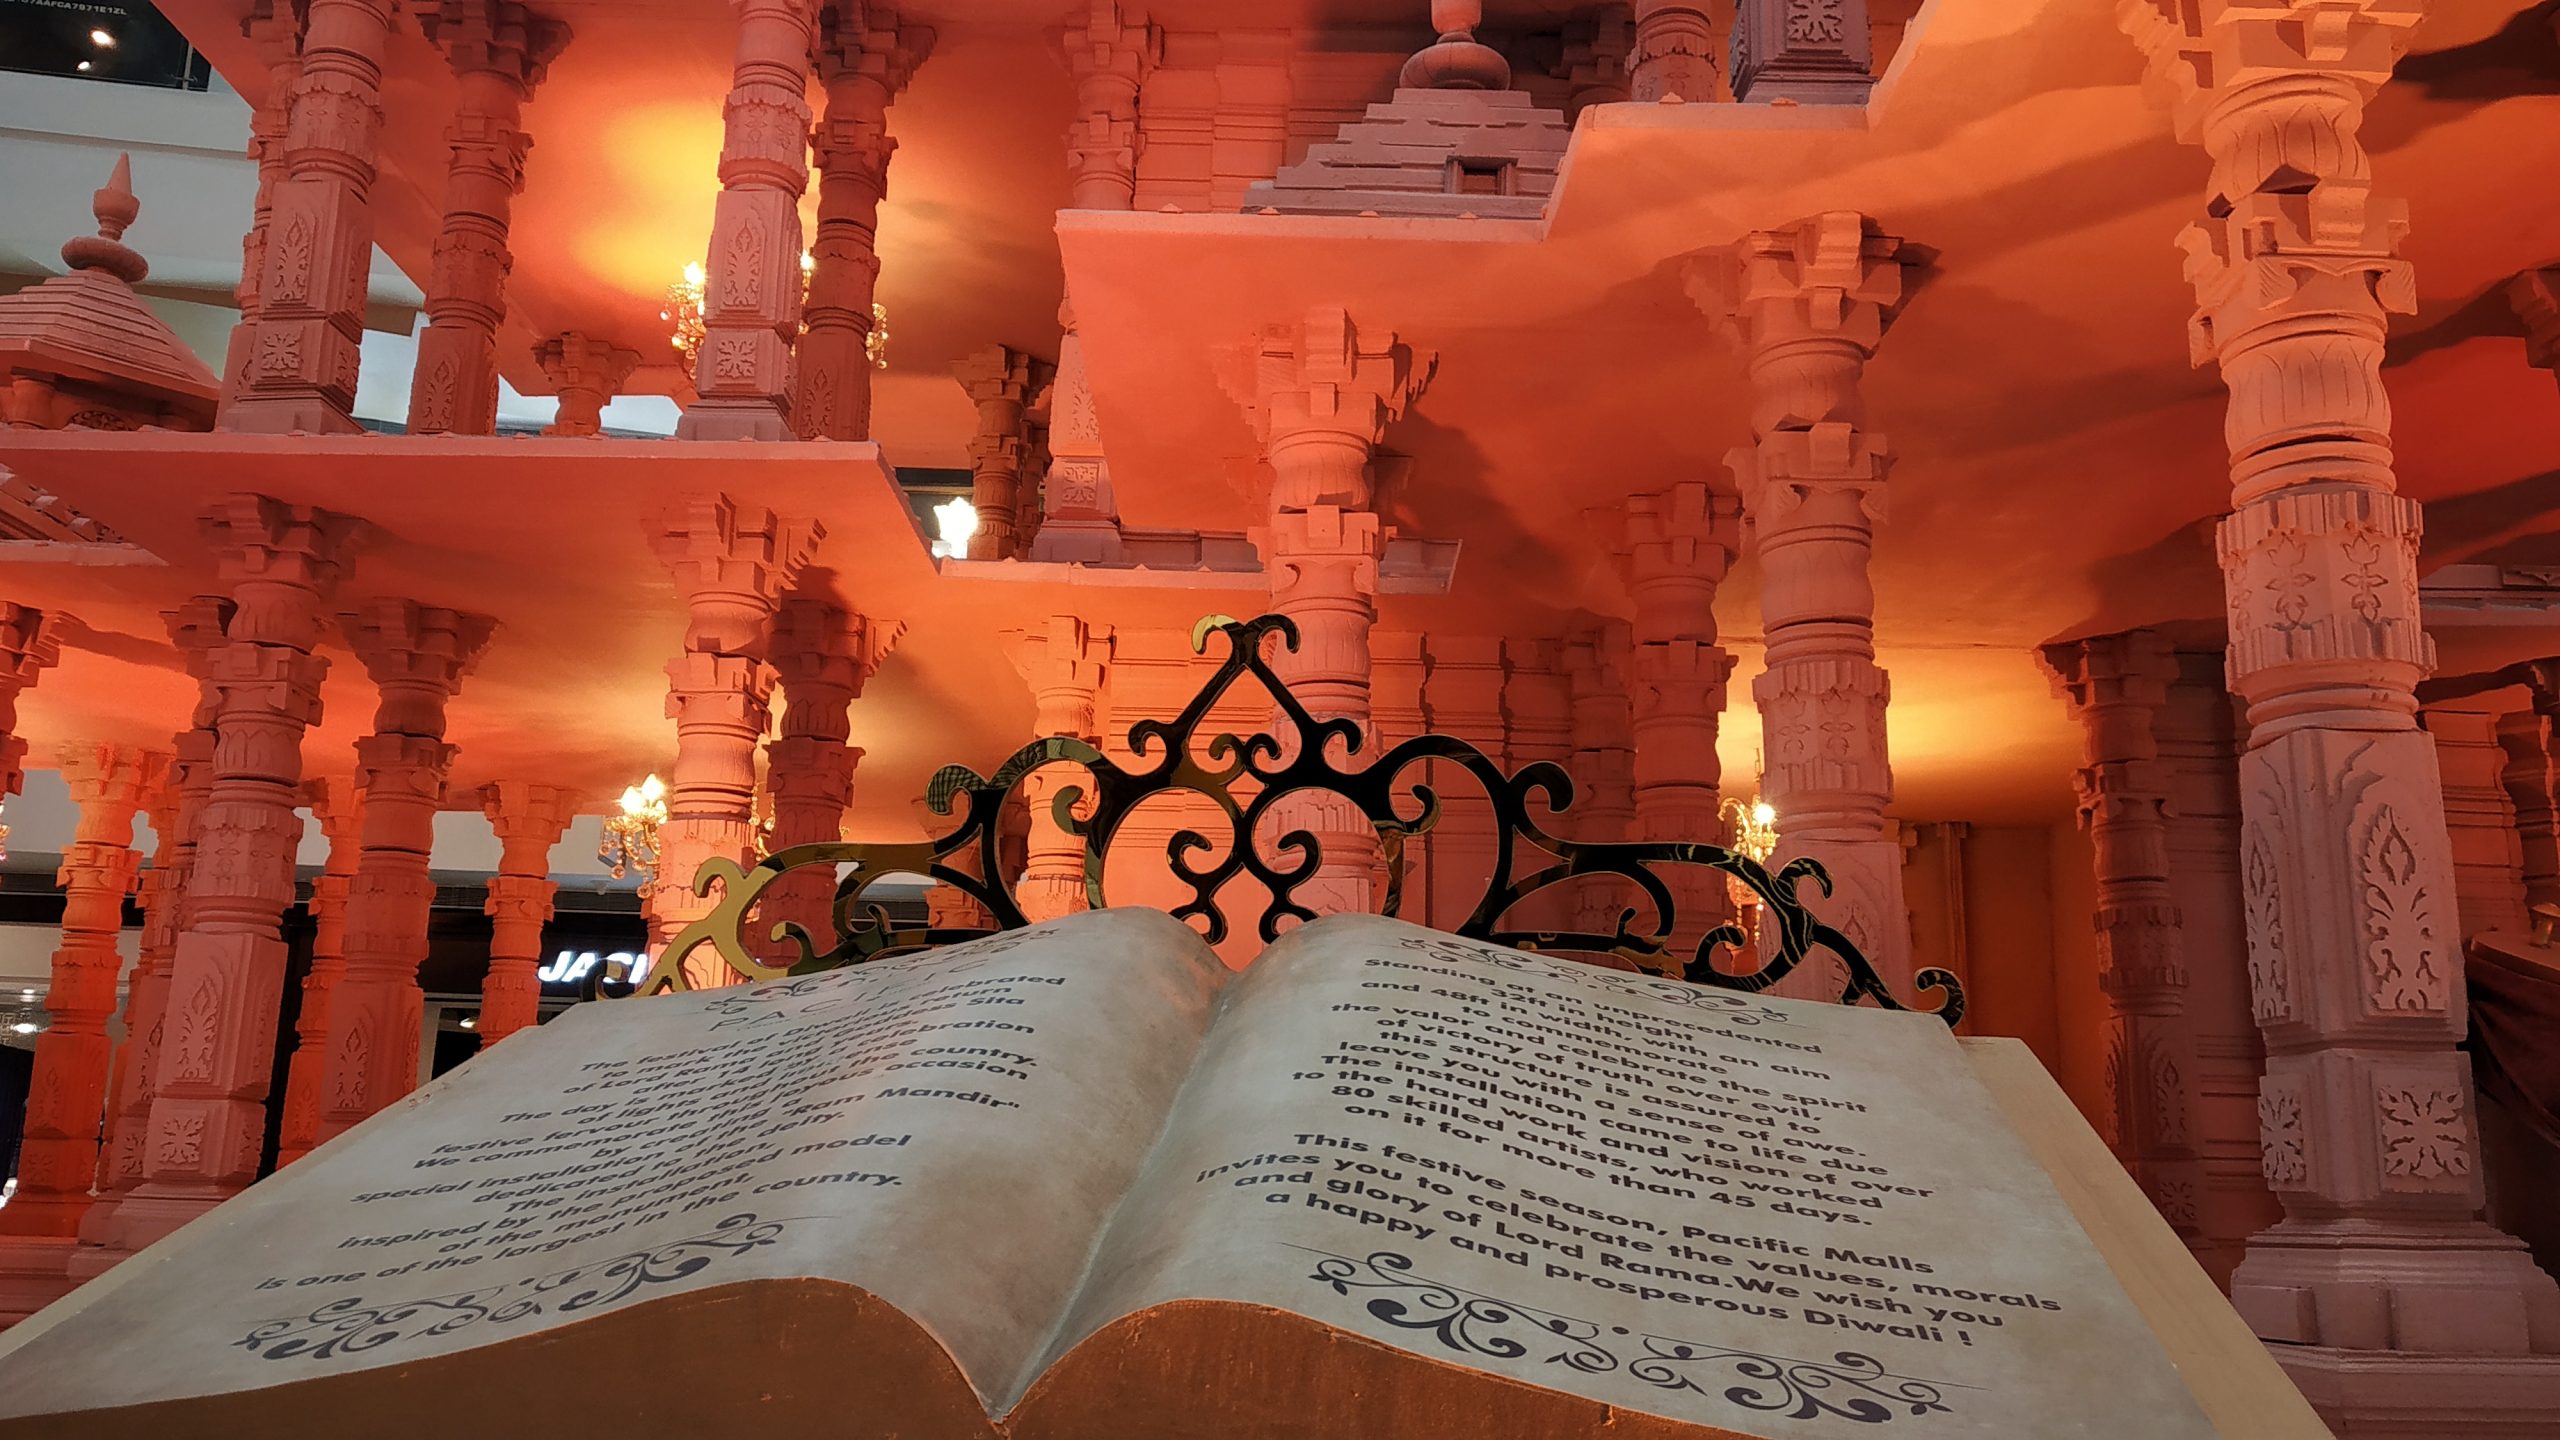 A holy book in a temple